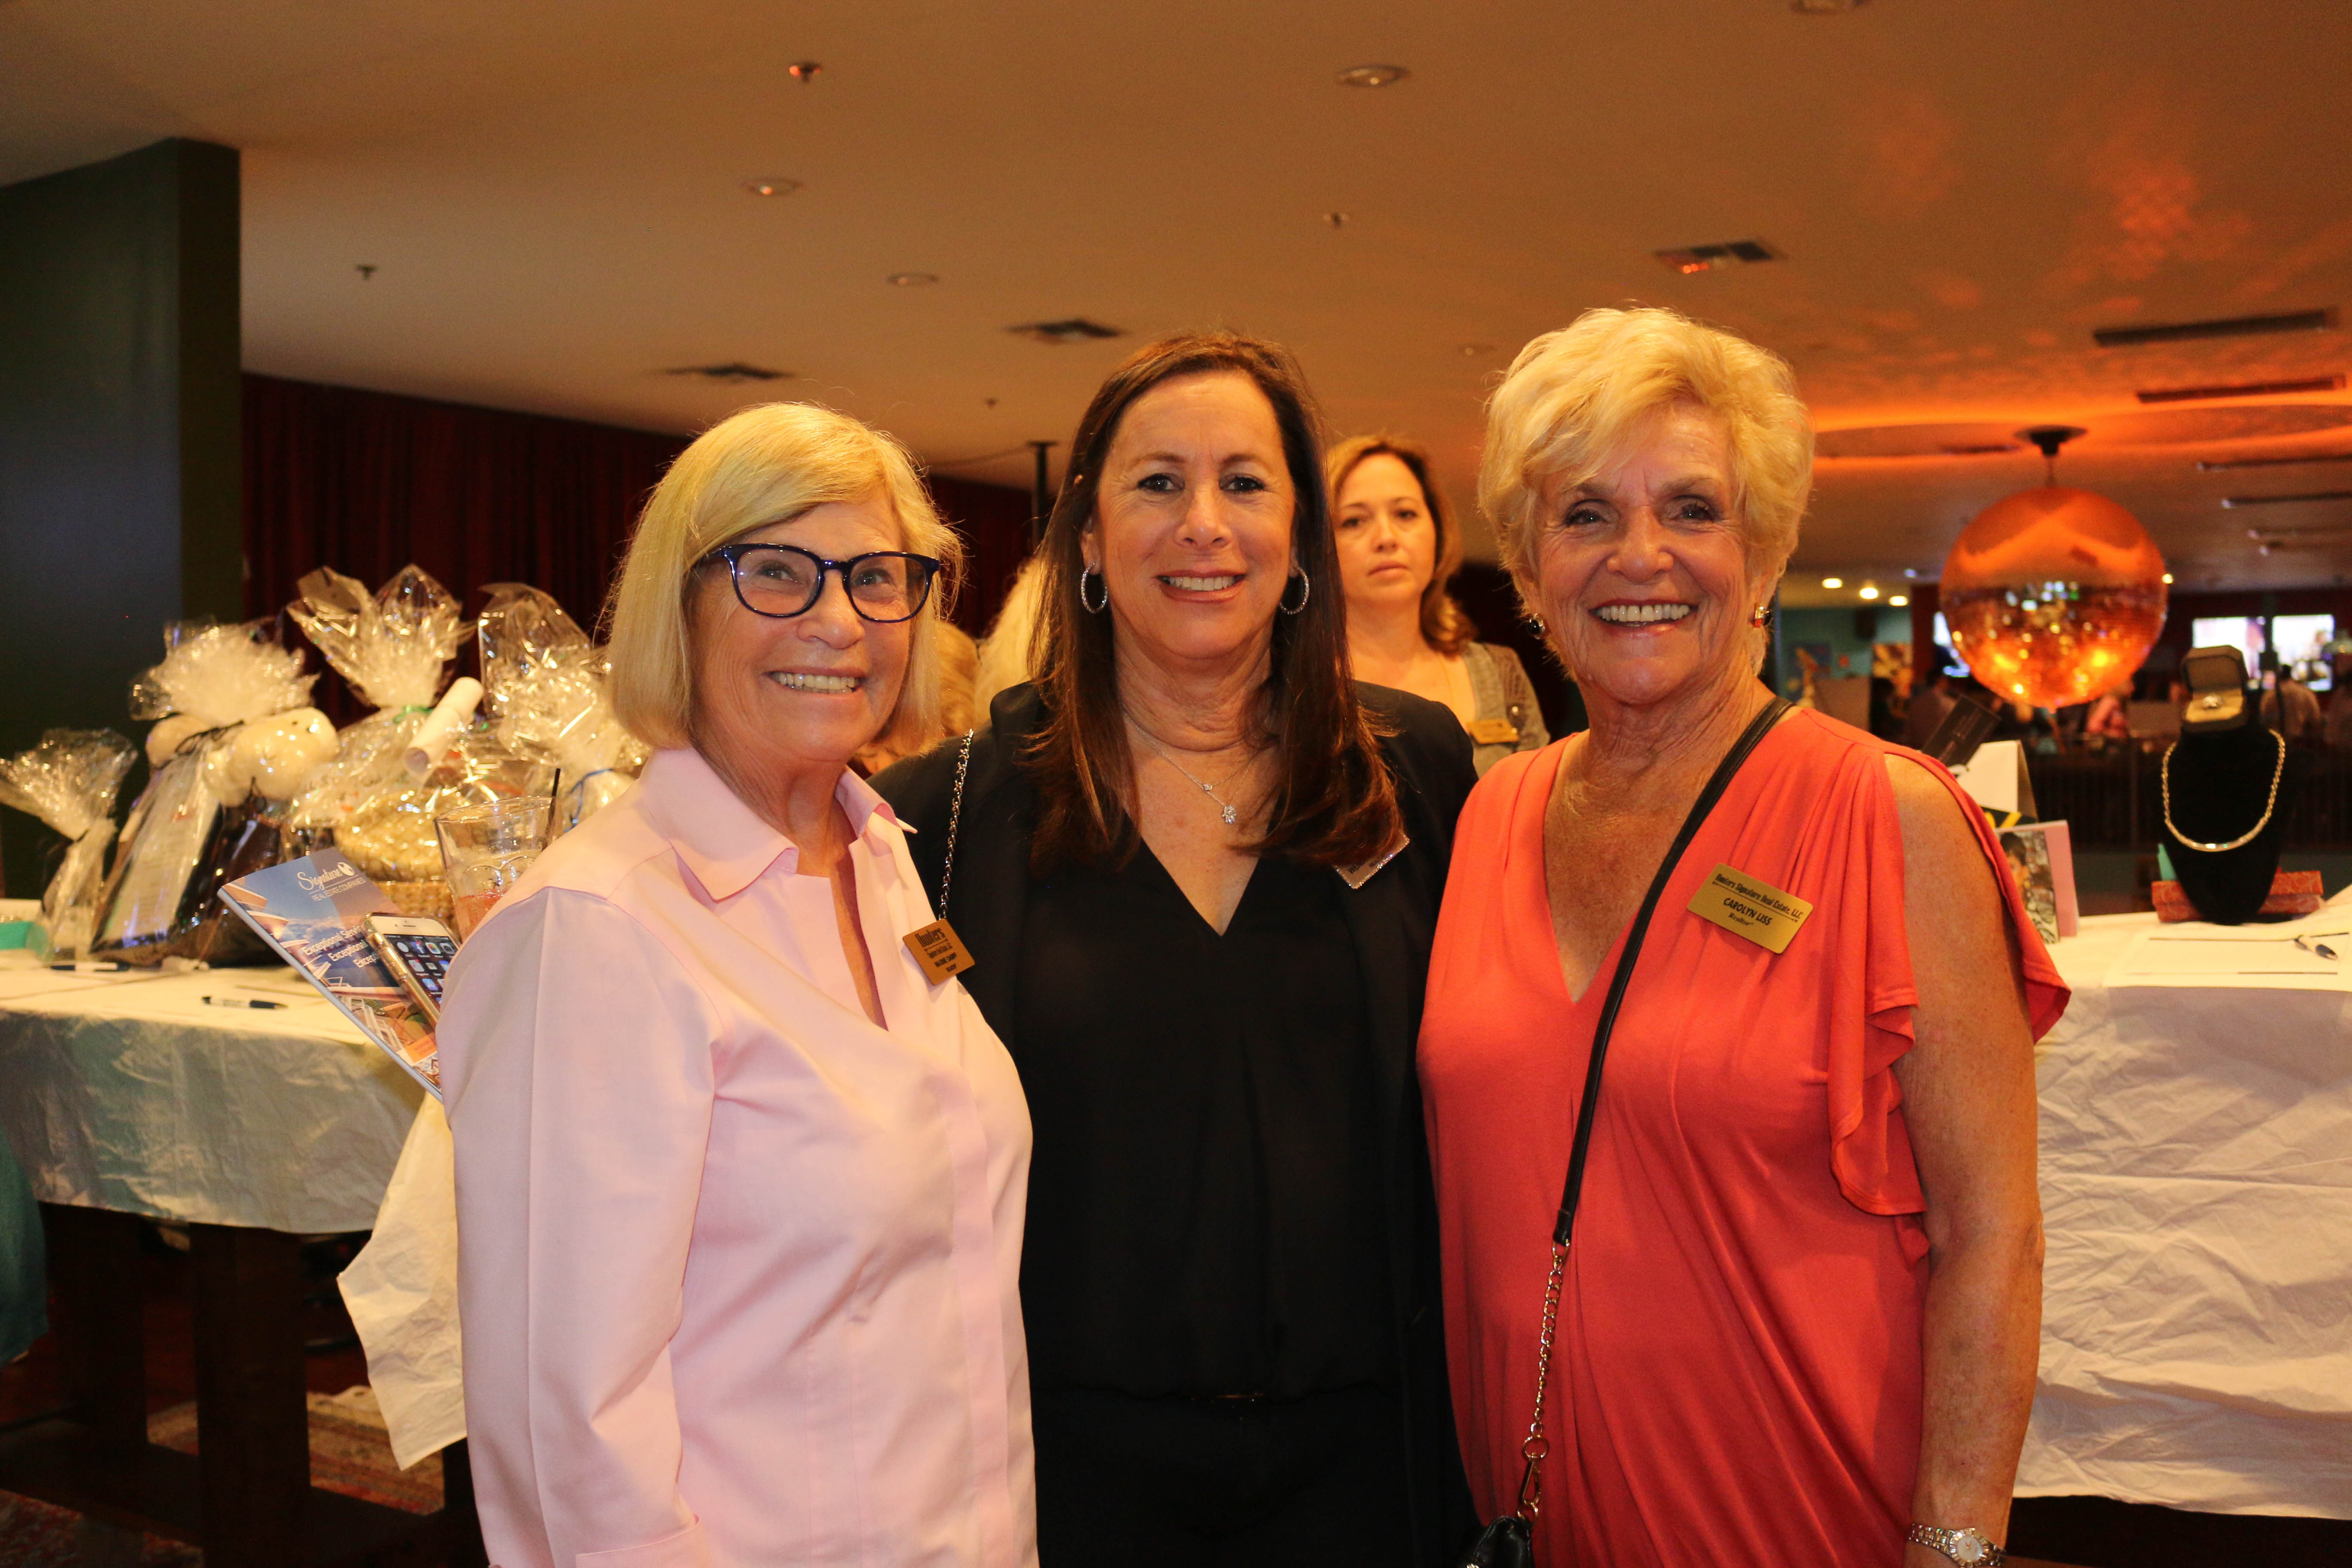 Committee Member Maxine Dampf, SGB Co-Chair Wendy Pressner, and Committee Member Carolyn Liss;